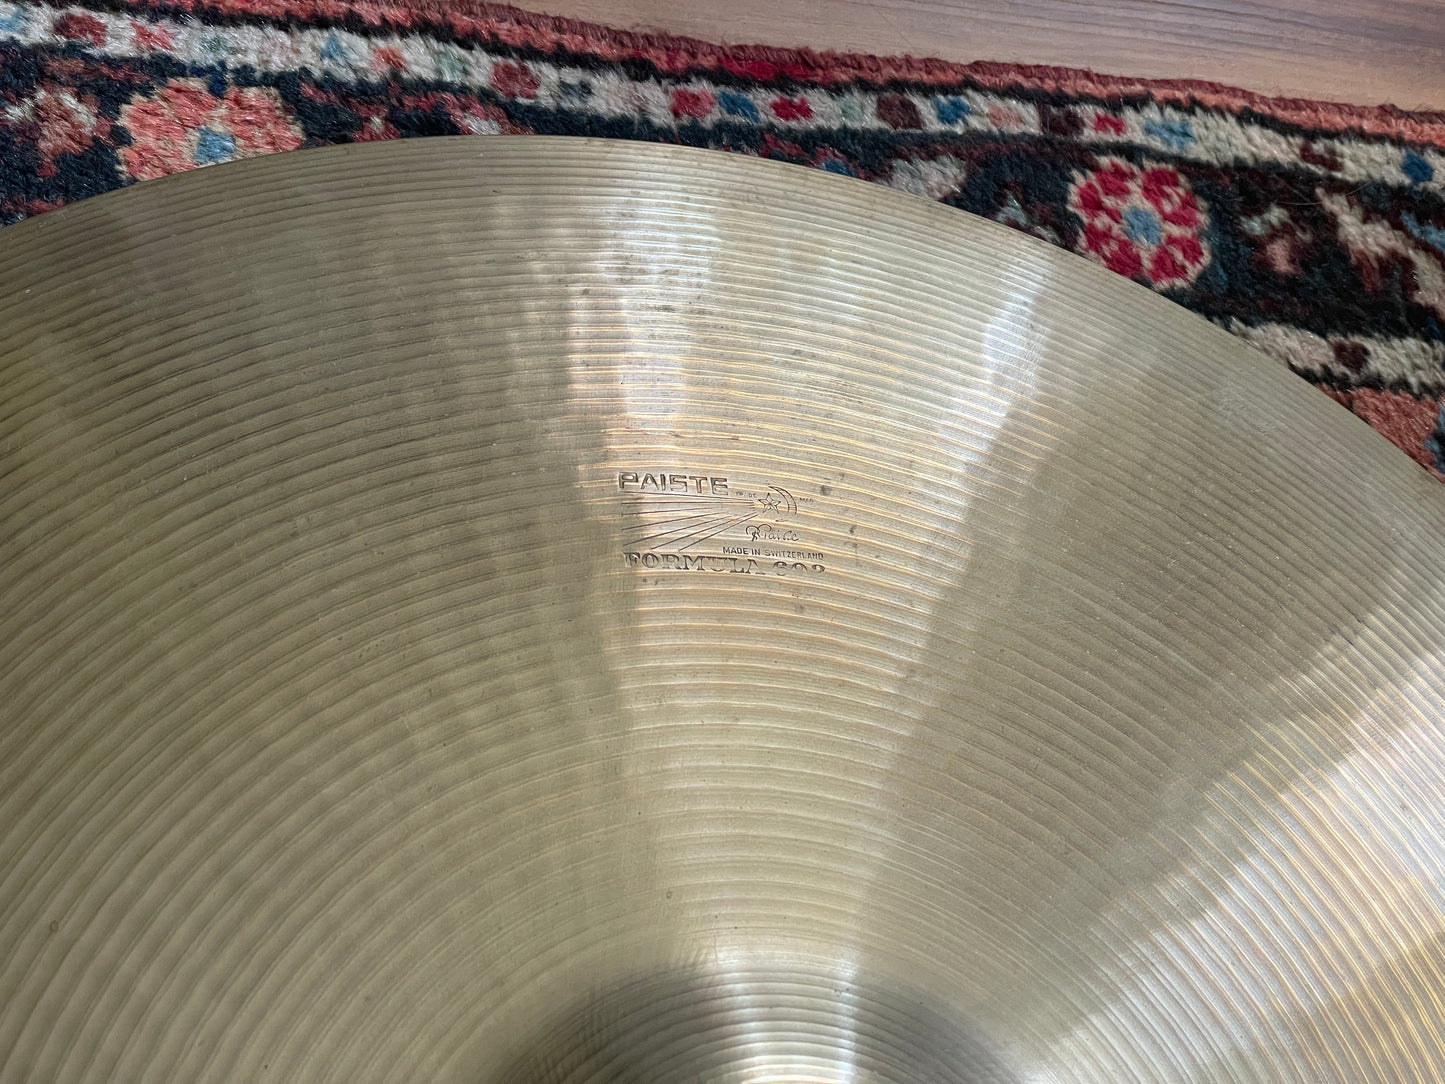 20" Paiste Pre-Serial Number Formula 602 Ride Cymbal 2478g #800